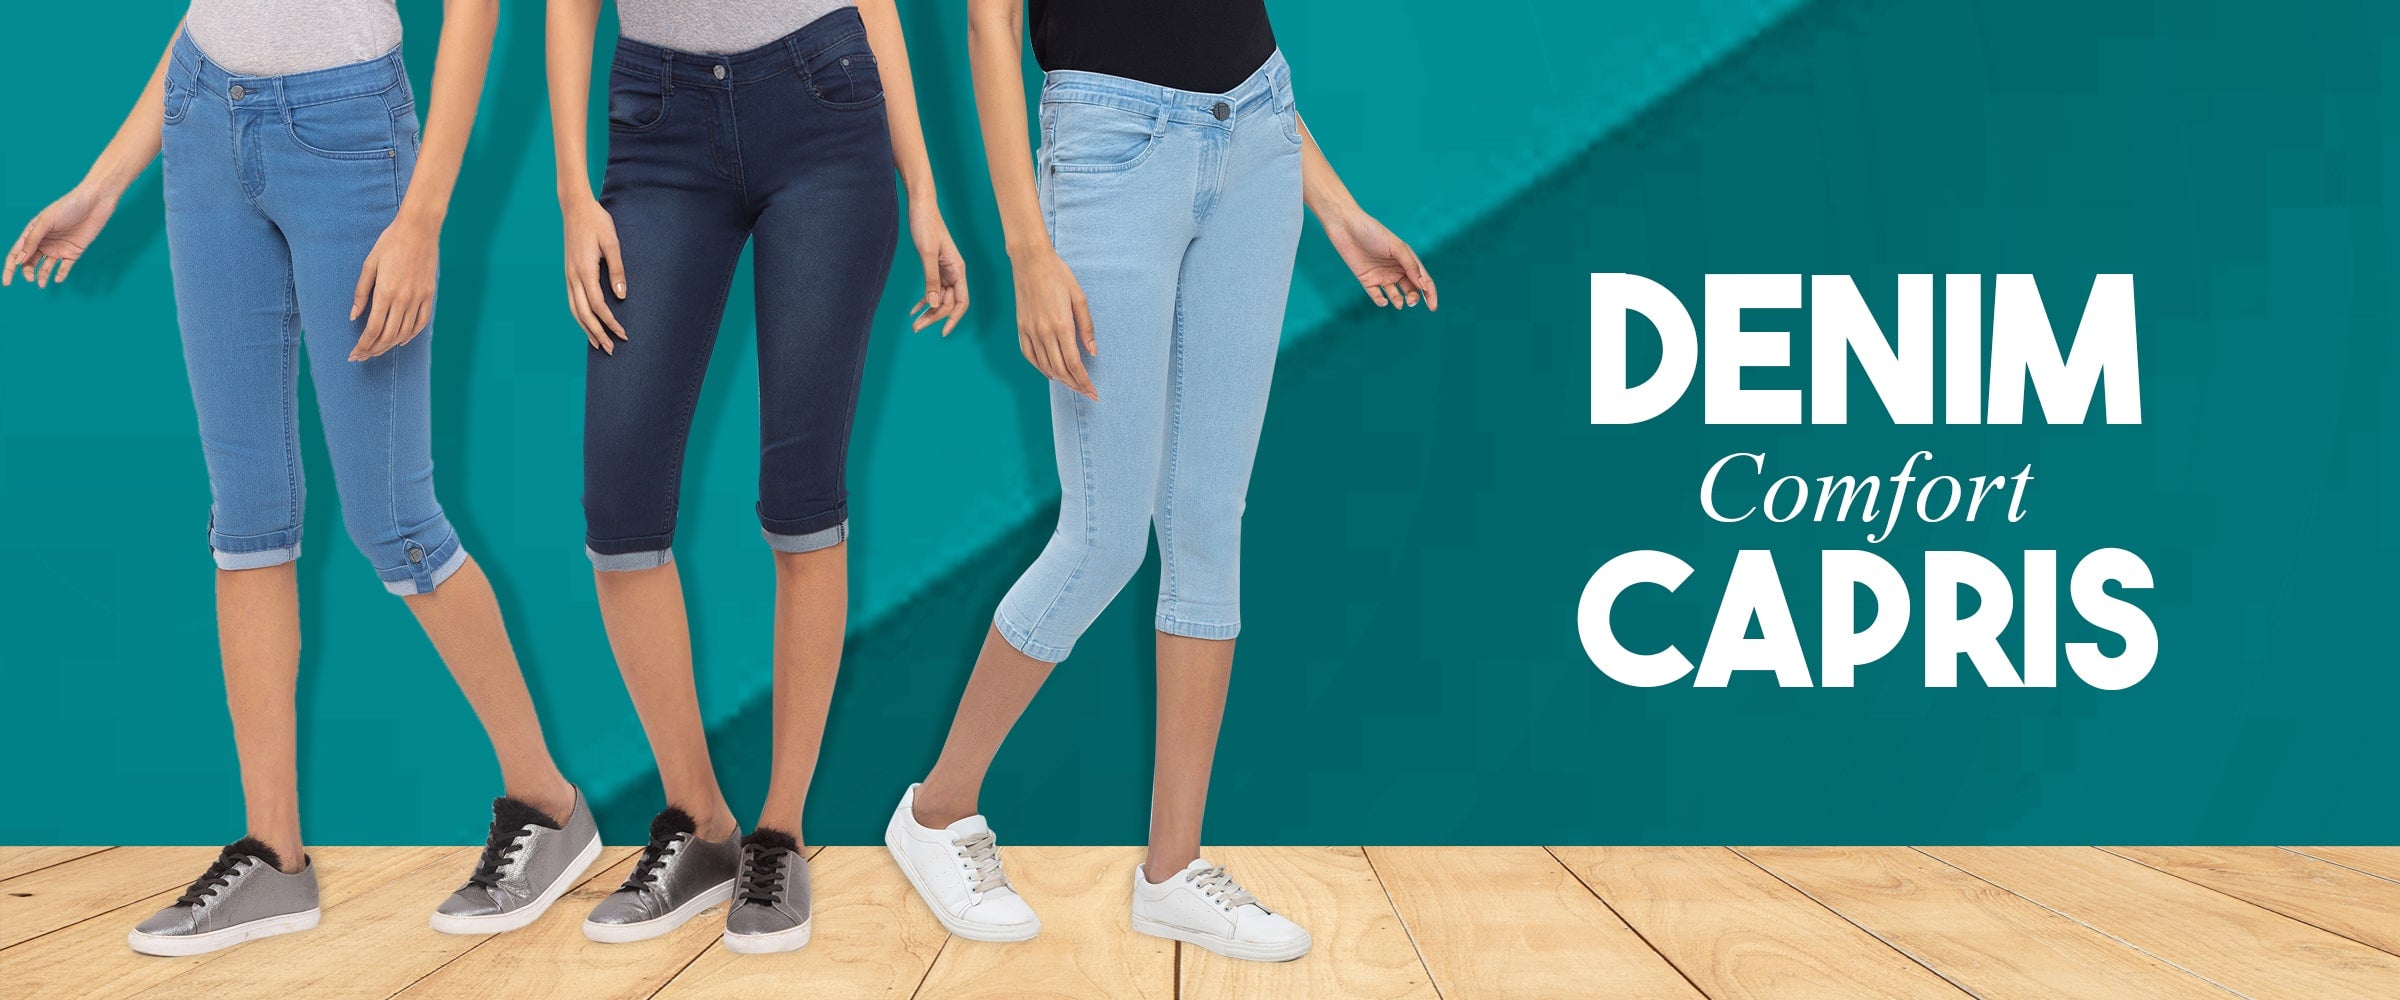 Chic Celebrations: Look Super Cool in Capris with These 6 Pro Tips